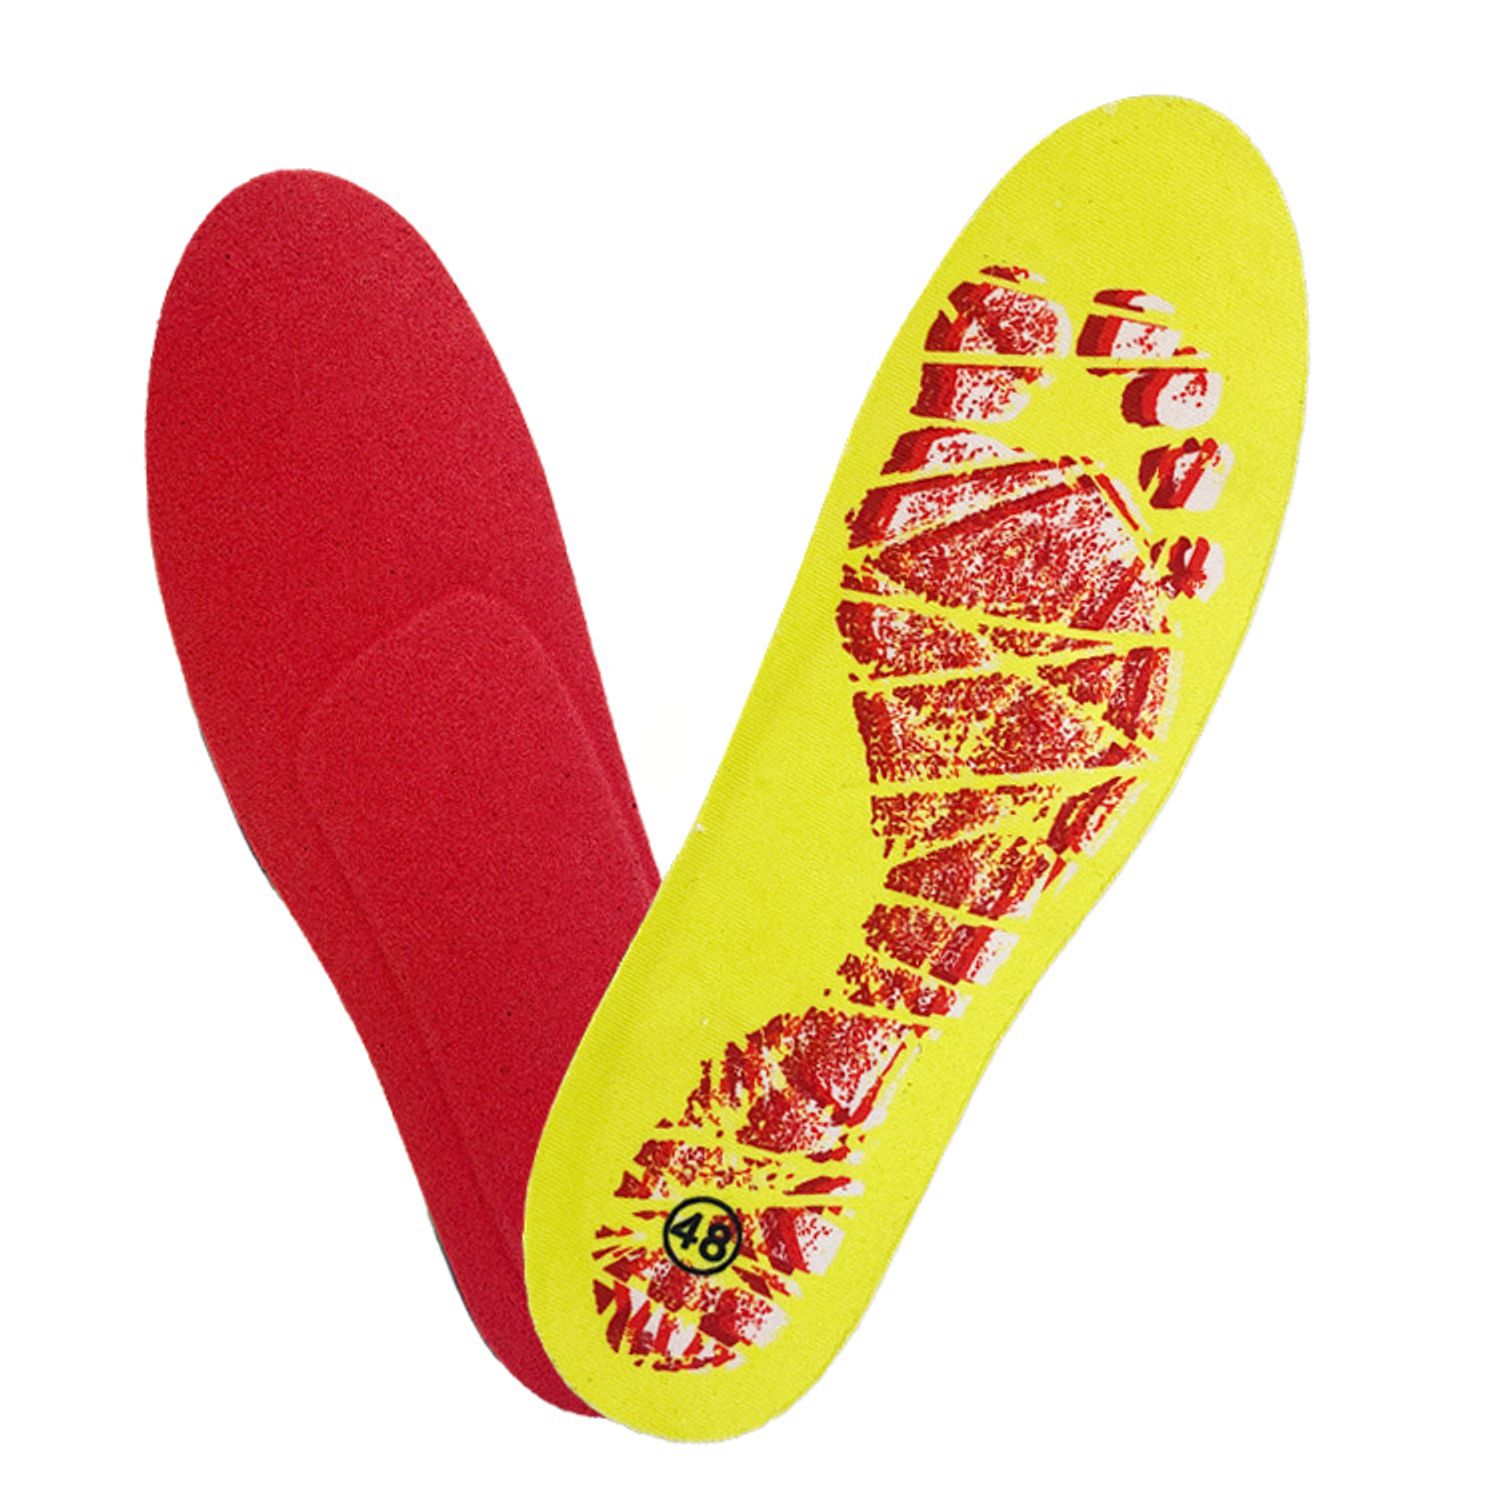 red and yellow microwave heated insoles size 48